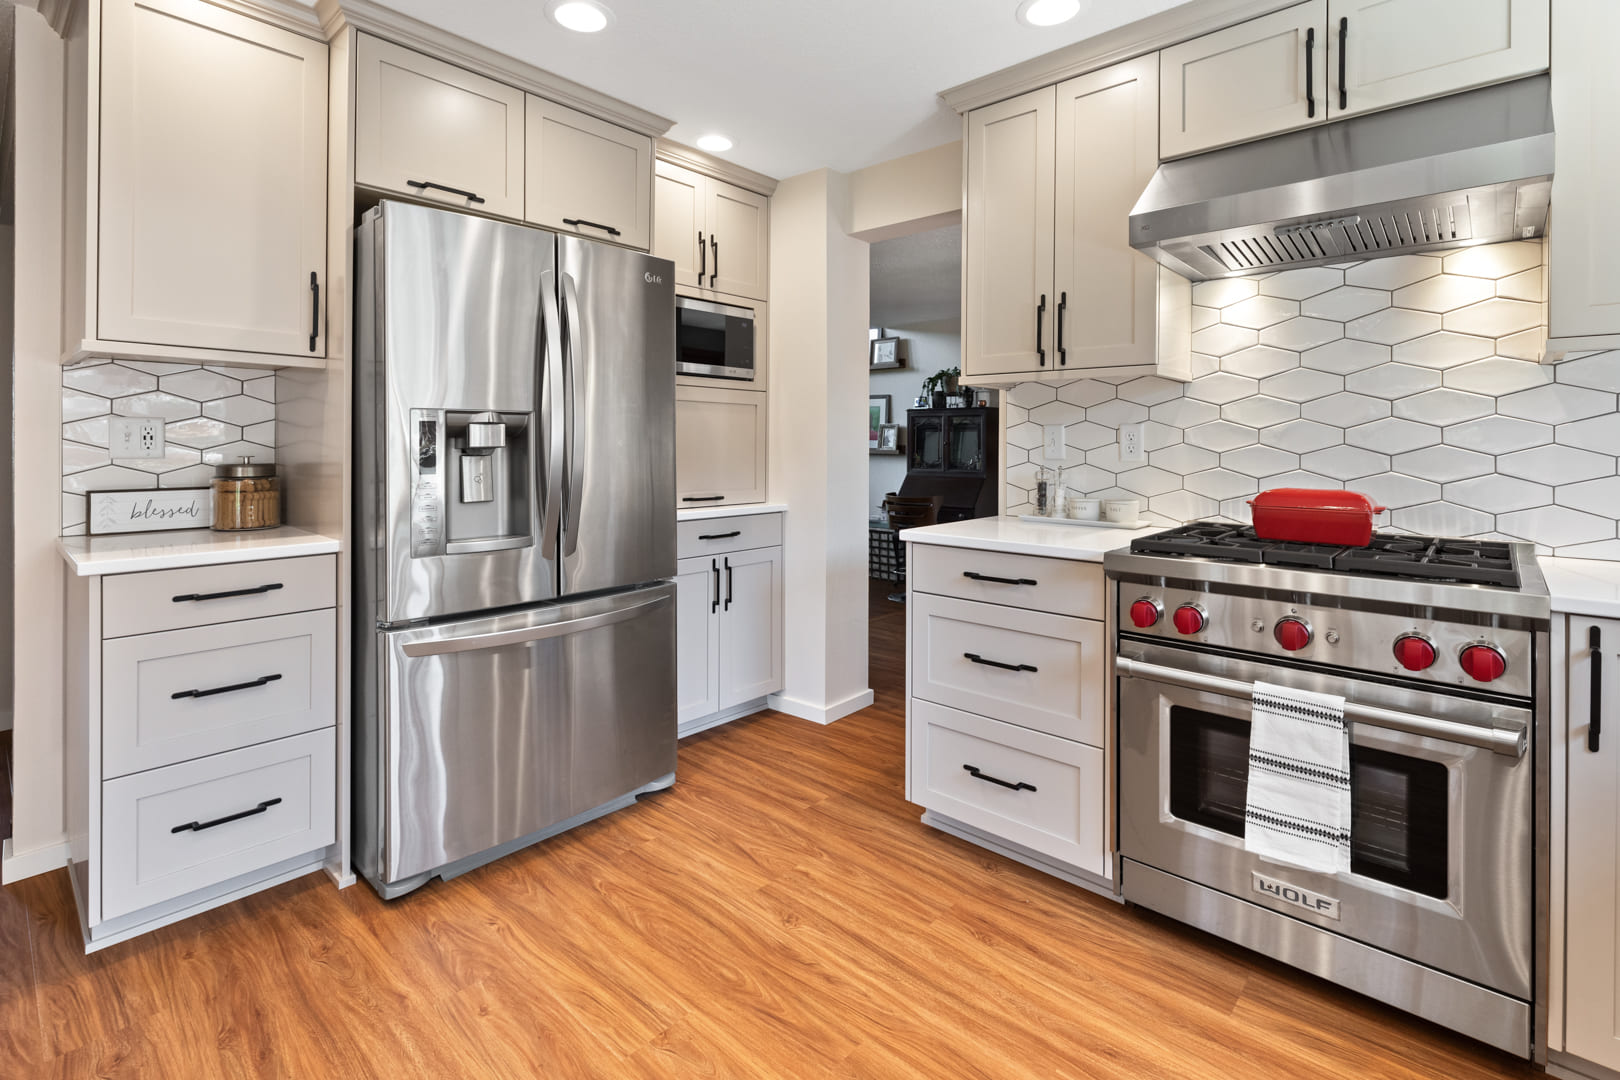 stainless steel appliances, hardwood floors, and light cabinets in remodeled kitchen by corvallis custom kitchens and baths in corvallis oregon